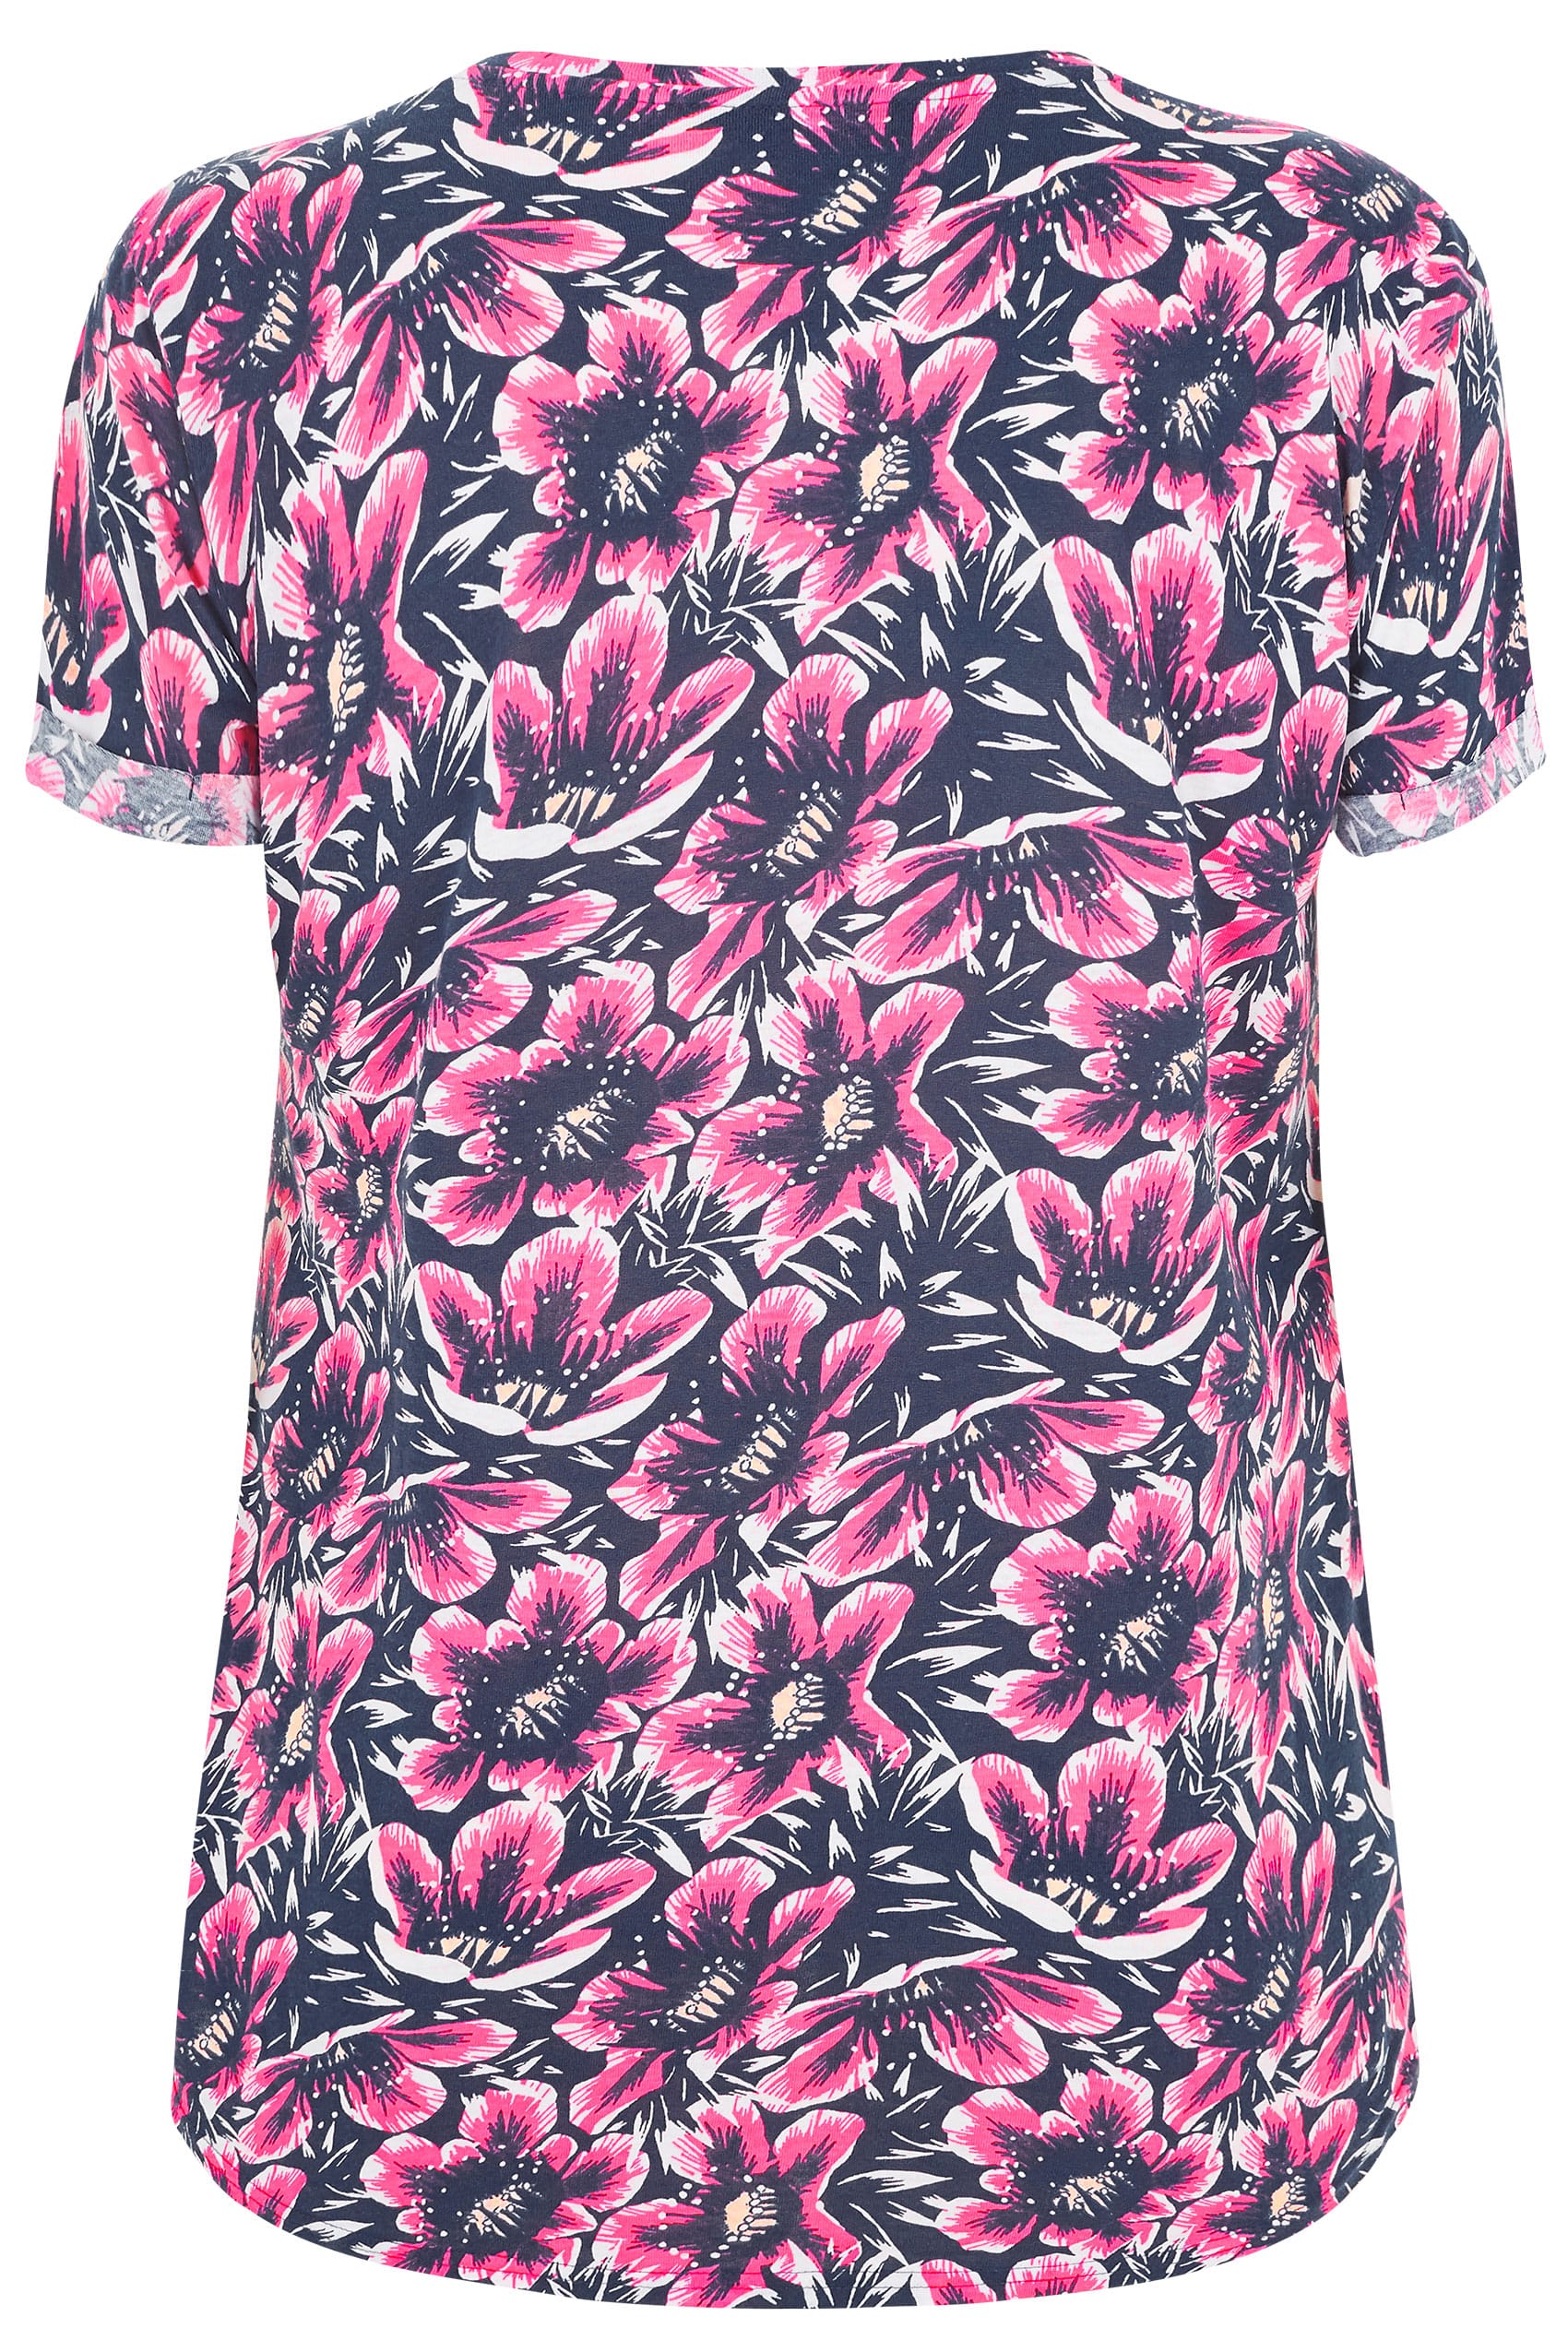 Navy & Pink Floral Hibiscus Pocket T-Shirt, plus size 16 to 36